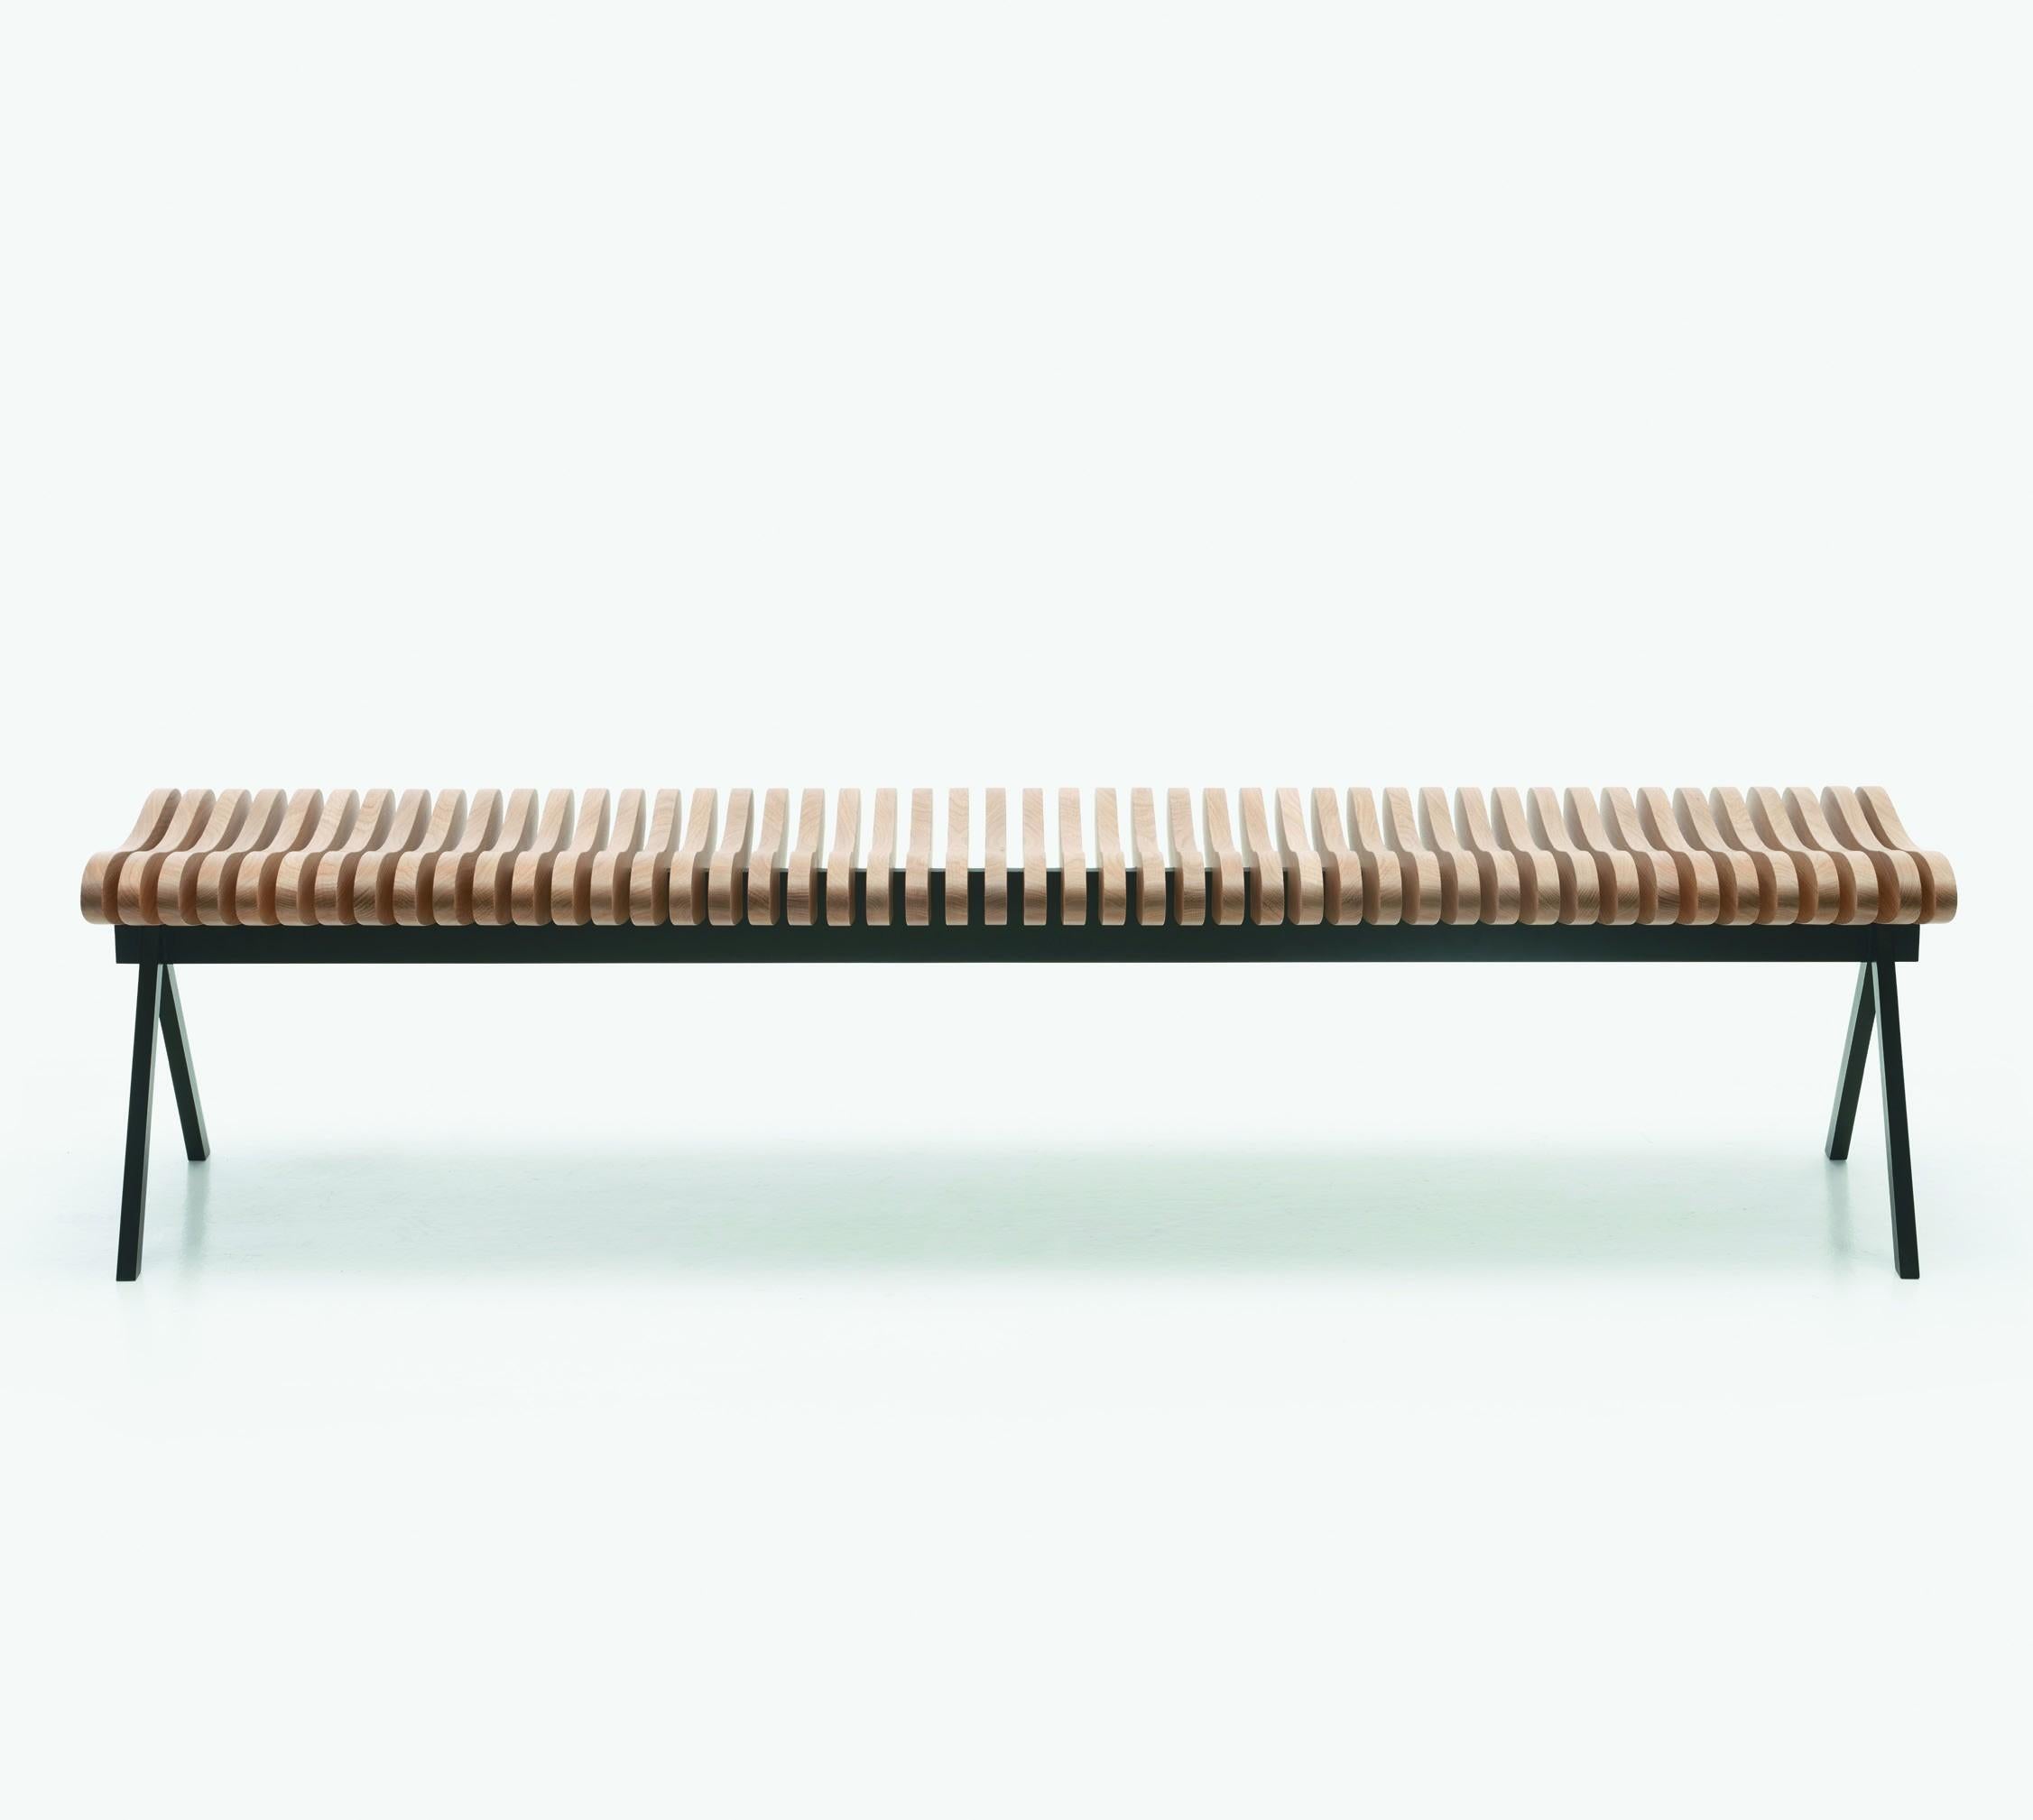 Perlude oak bench small by Caroline Voet
Dimensions: 120 x H 43 cm
Materials: Natural Oak
Also available in seating oak black, seating walnut natural, seating teak (outdoor).

The PRELUDE benches are assembled from top grade FSC-labelled wood,